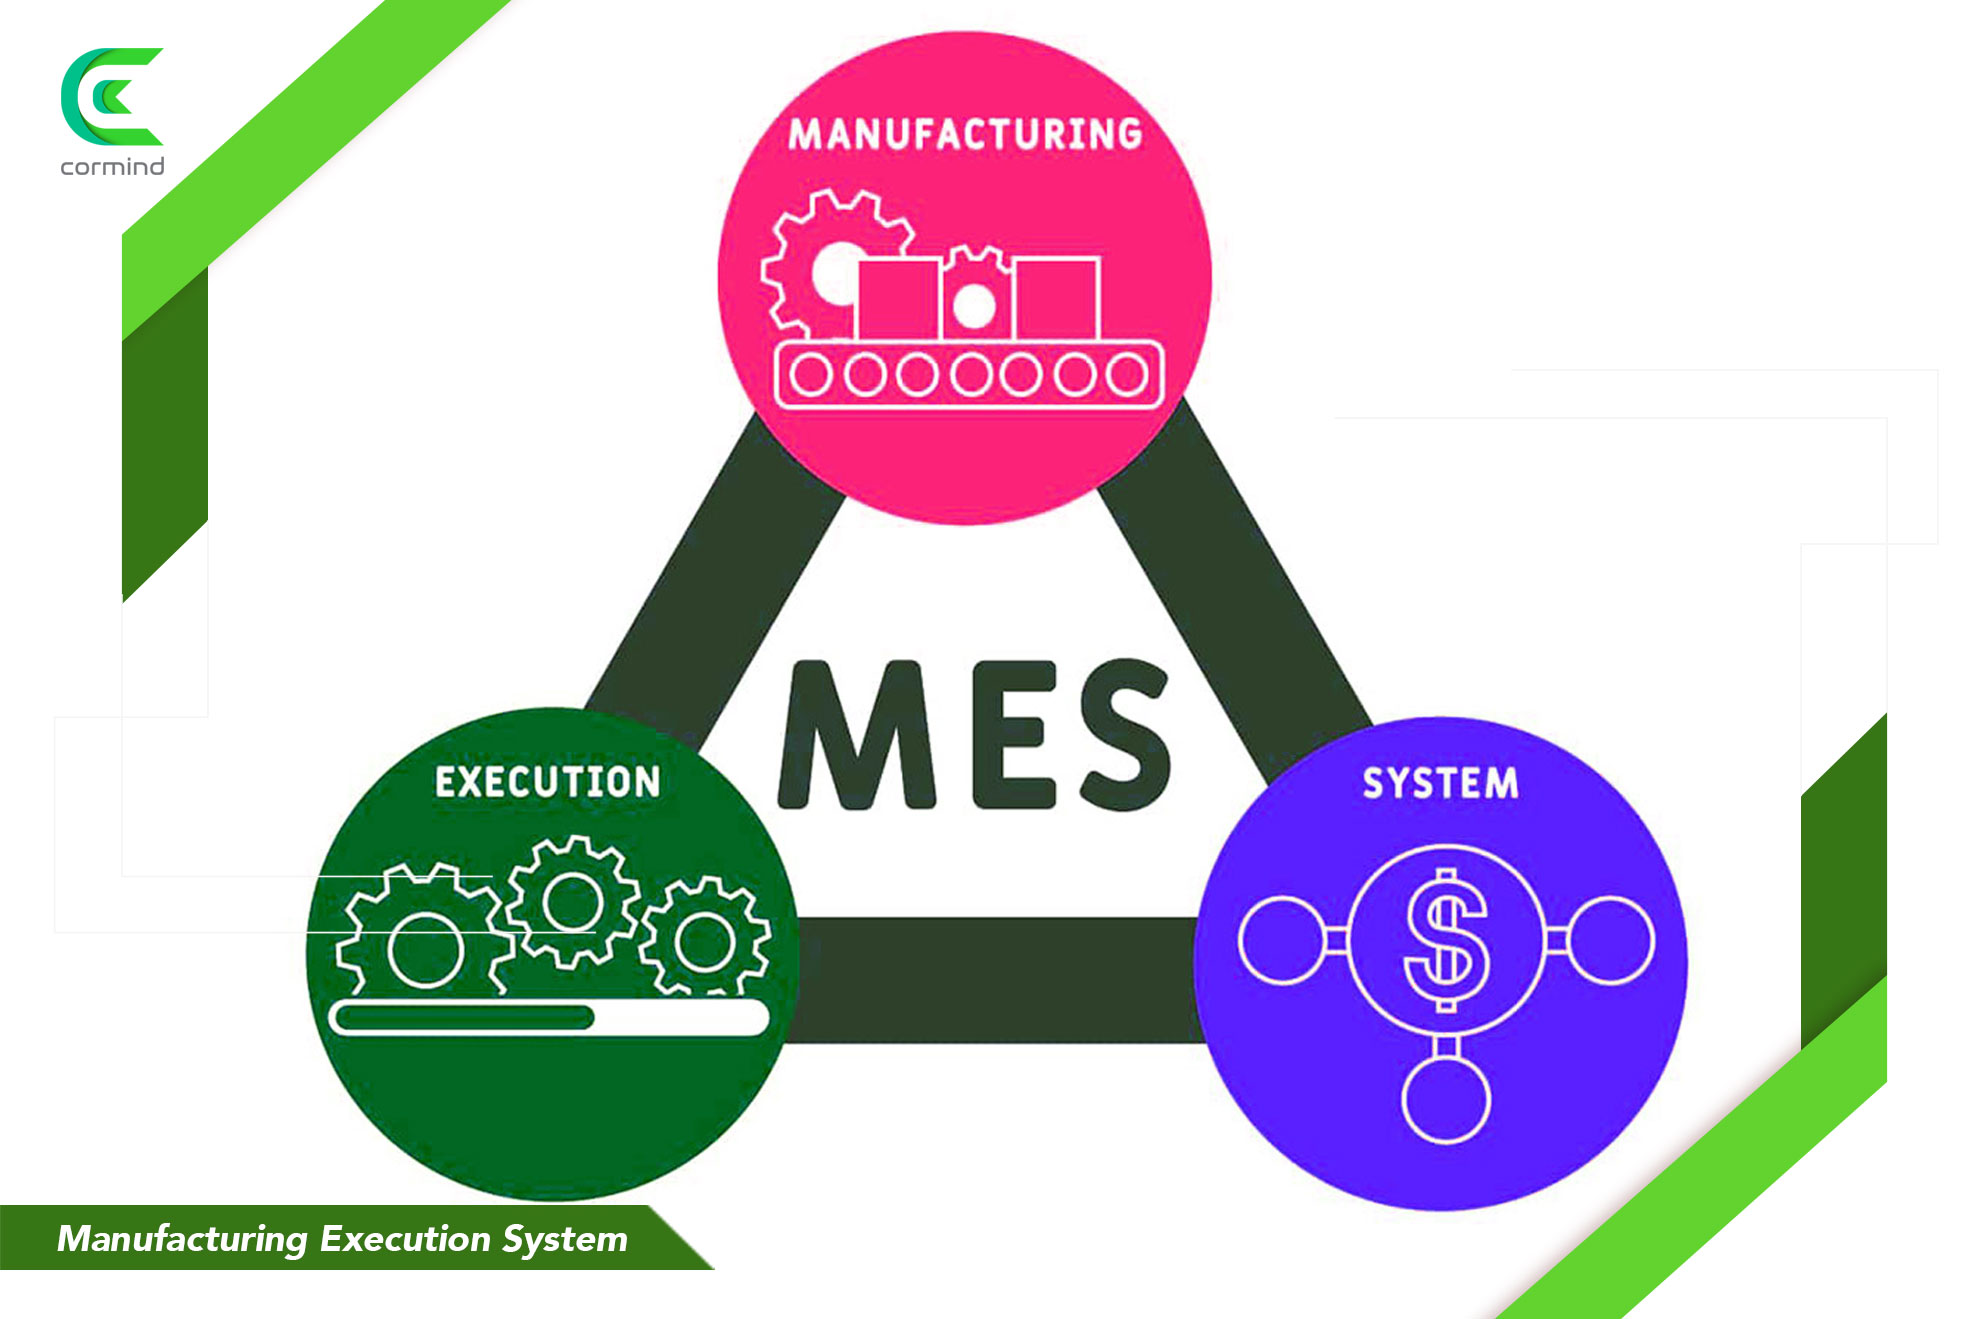 manufacturing execution system, mes, what is mes, what is manufacturing execution system,